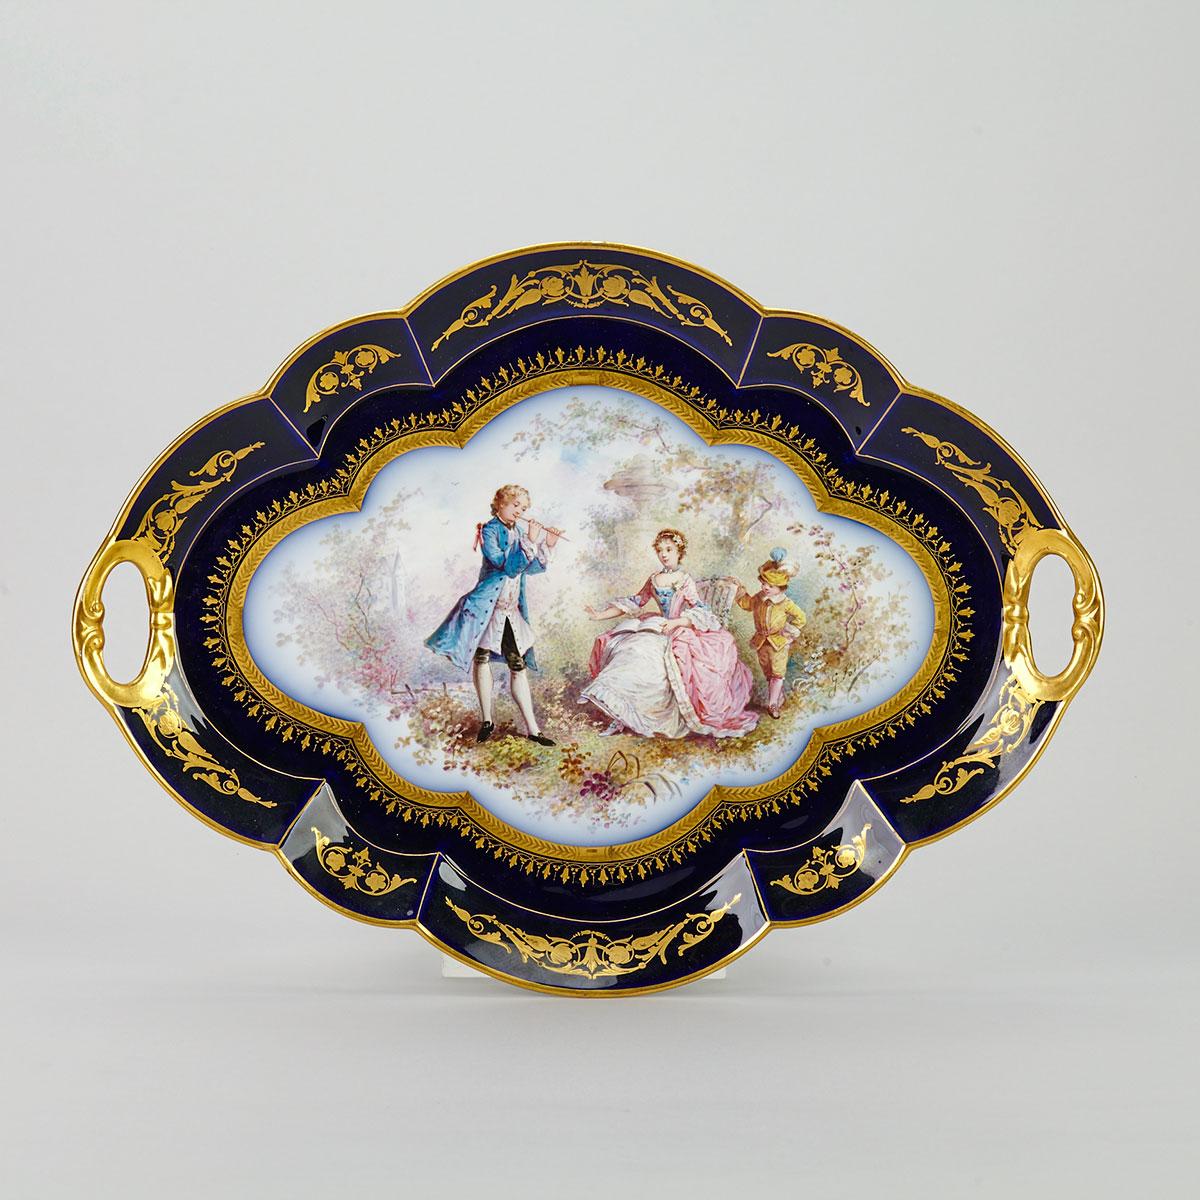 ‘Sèvres’ Two Handled Oval Serving Tray, late 19th century